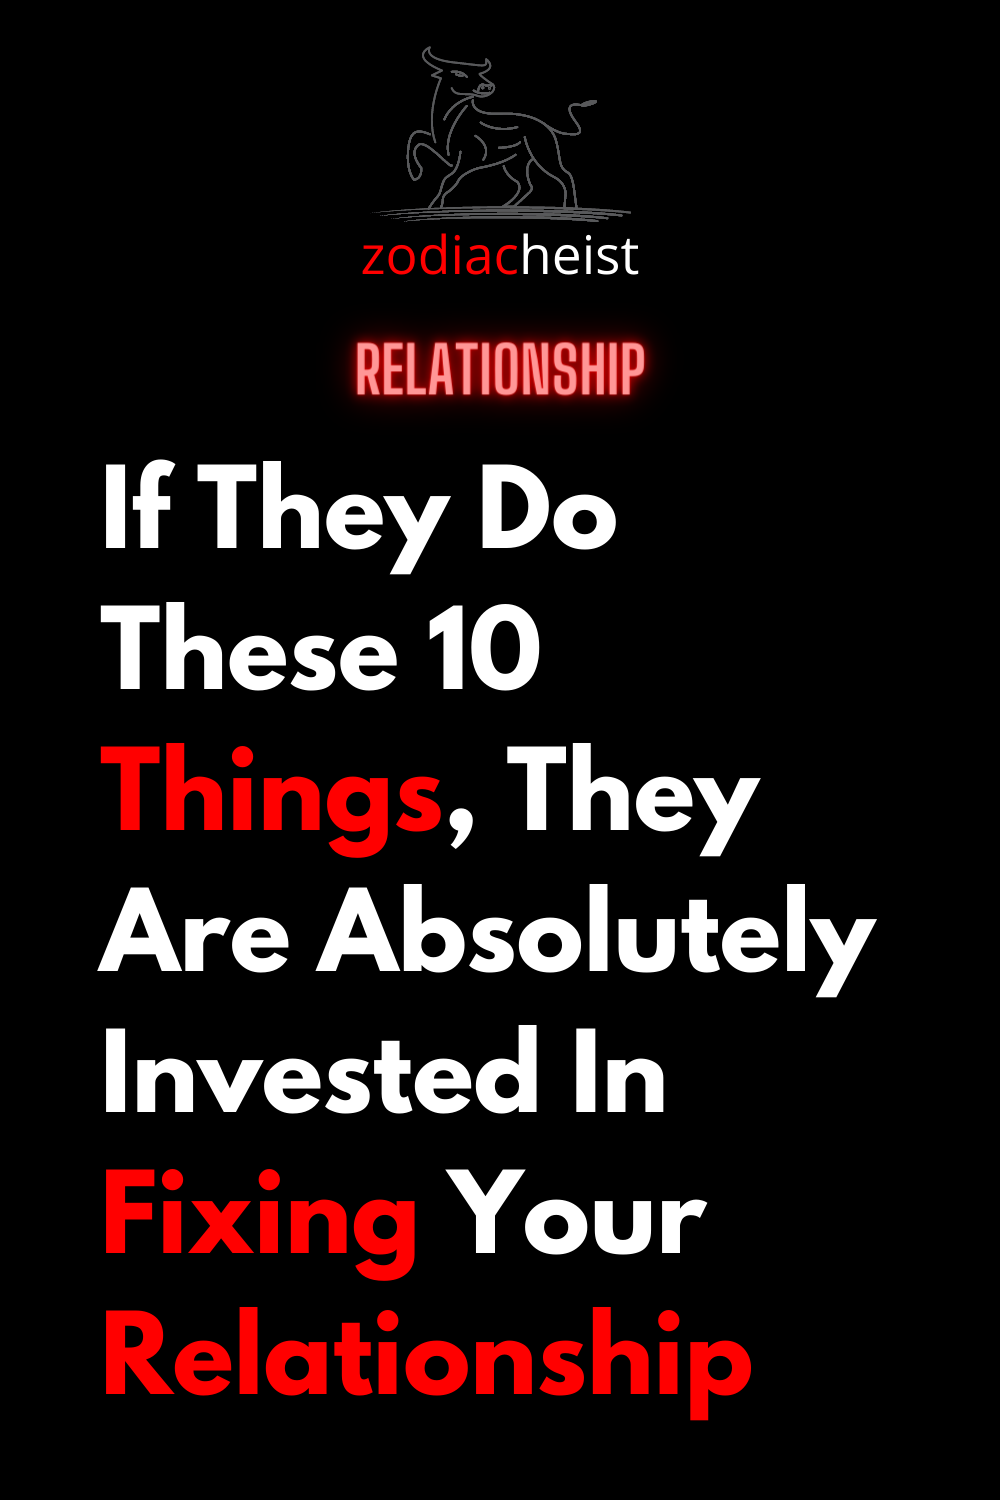 If They Do These 10 Things, They Are Absolutely Invested In Fixing Your Relationship